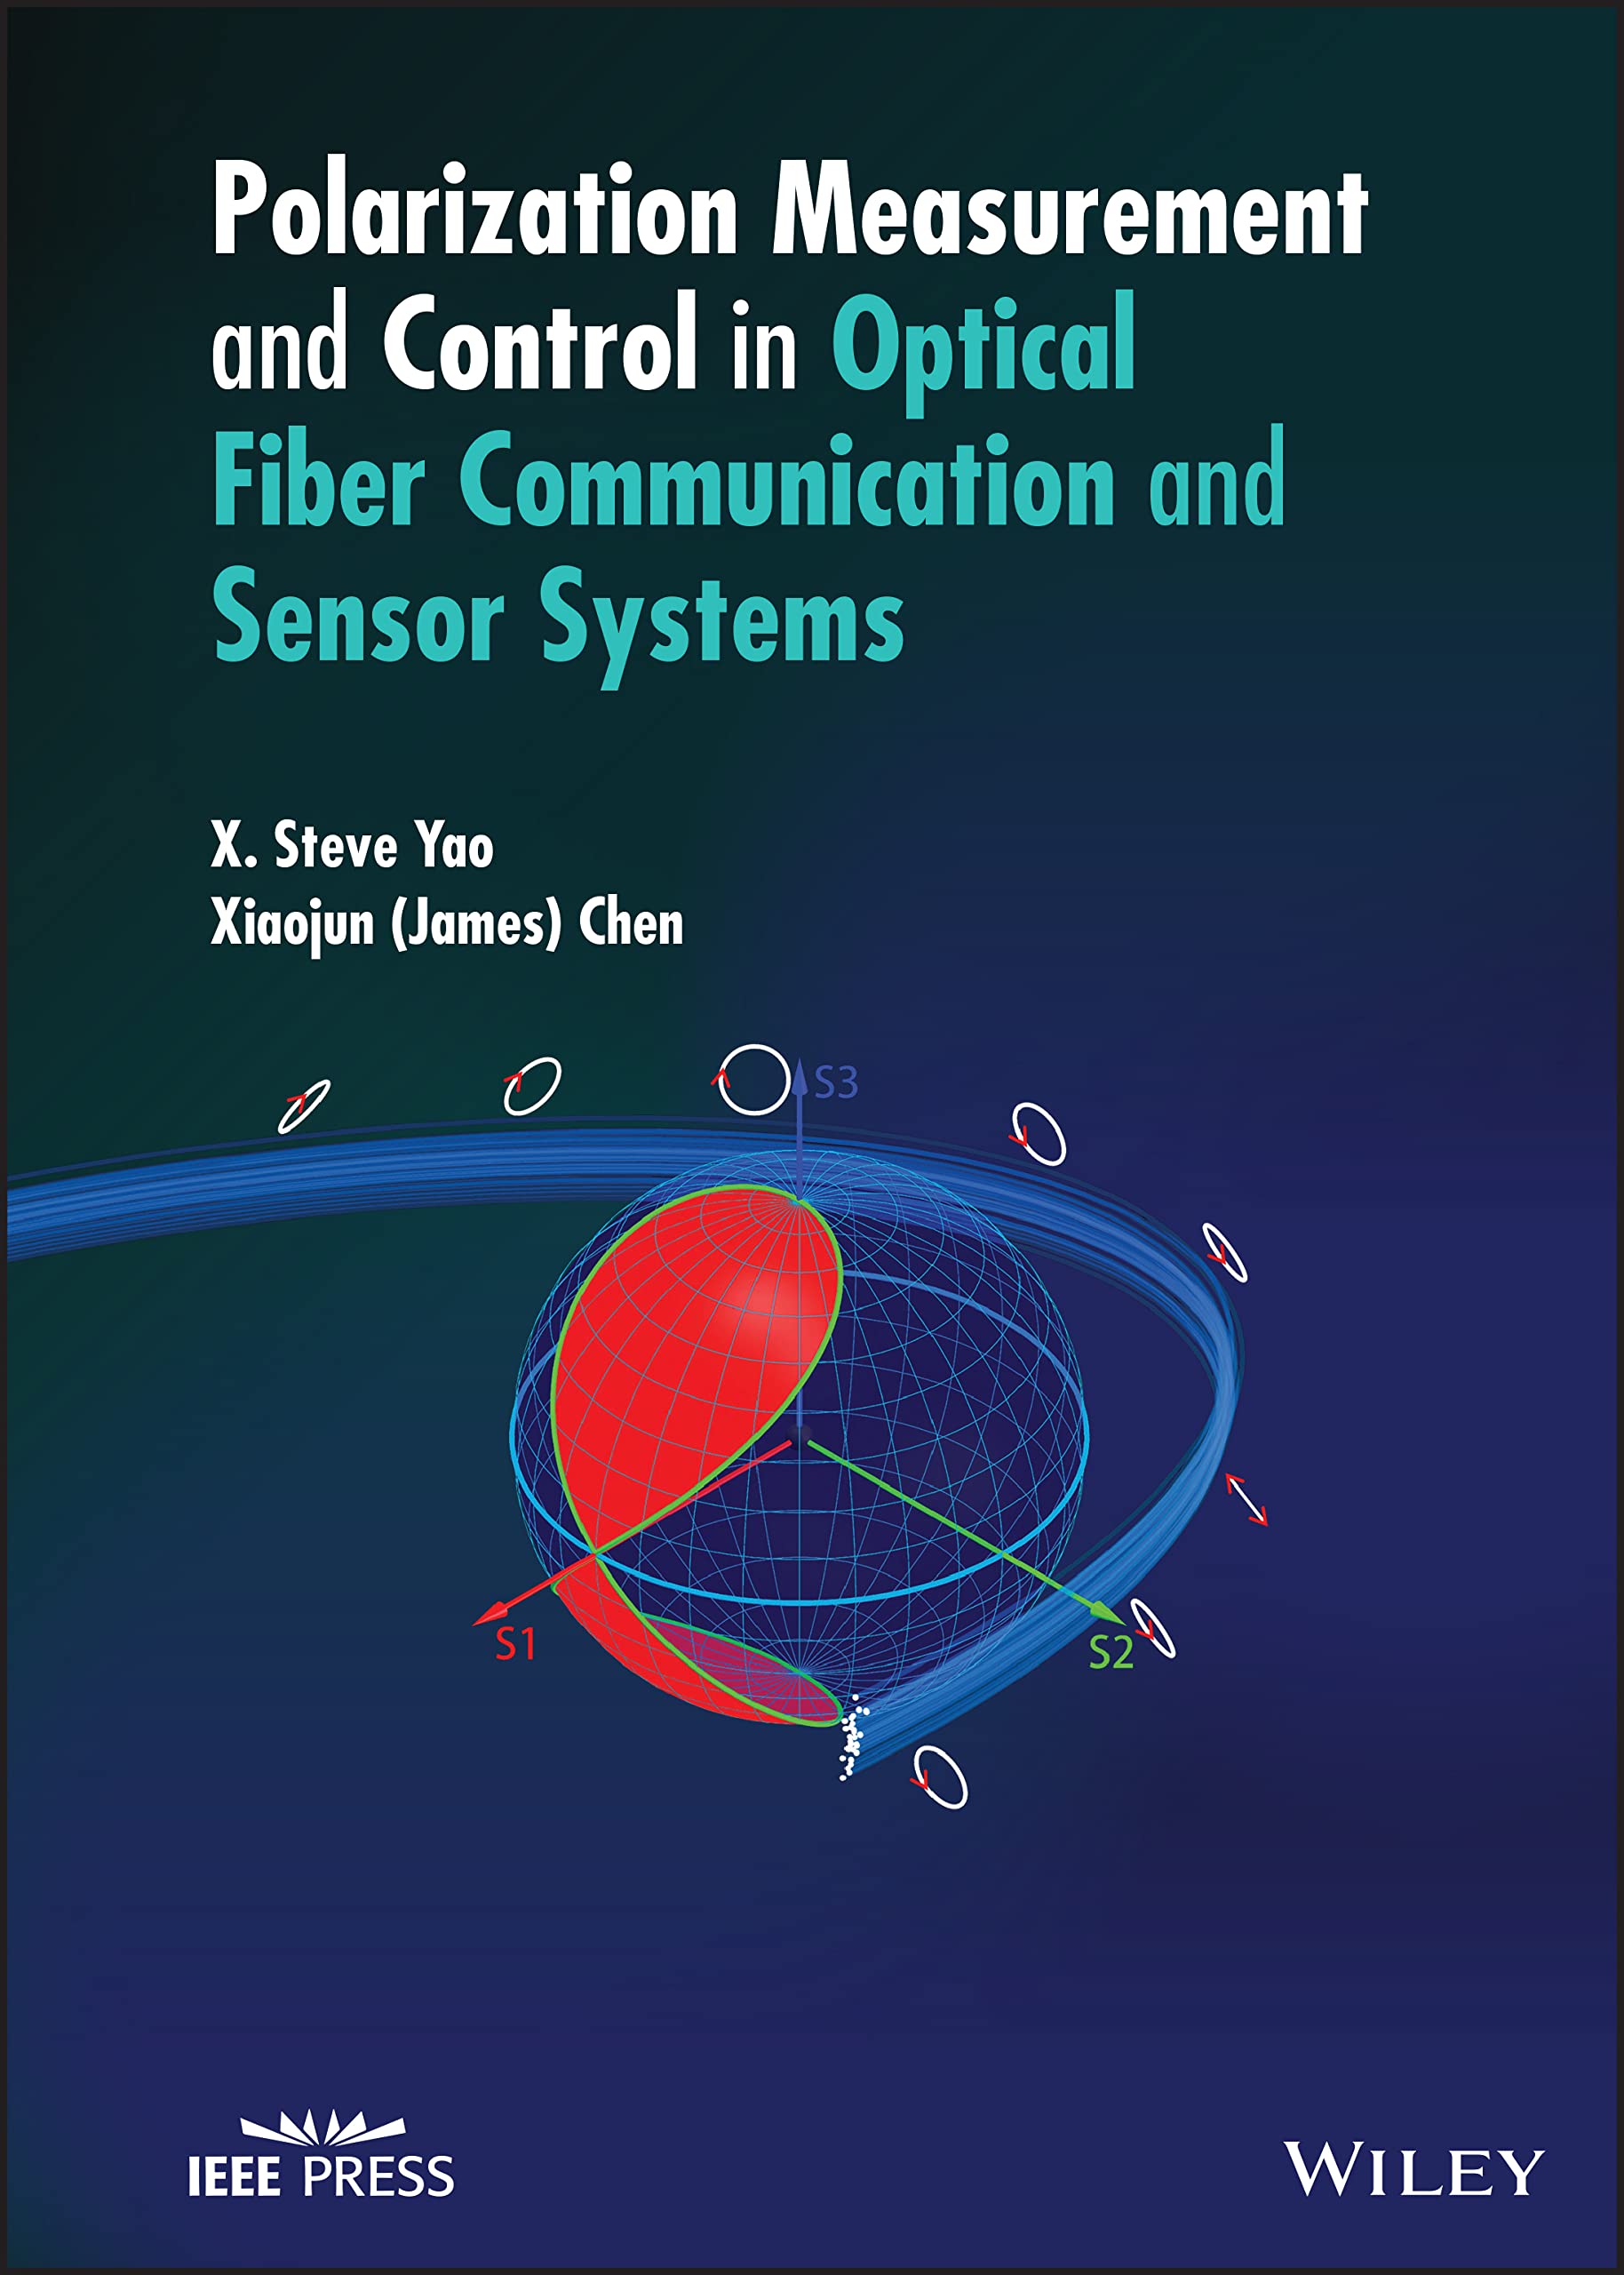 Polarization Measurement and Control in Optical Fiber Communication and Sensor Systems pdf